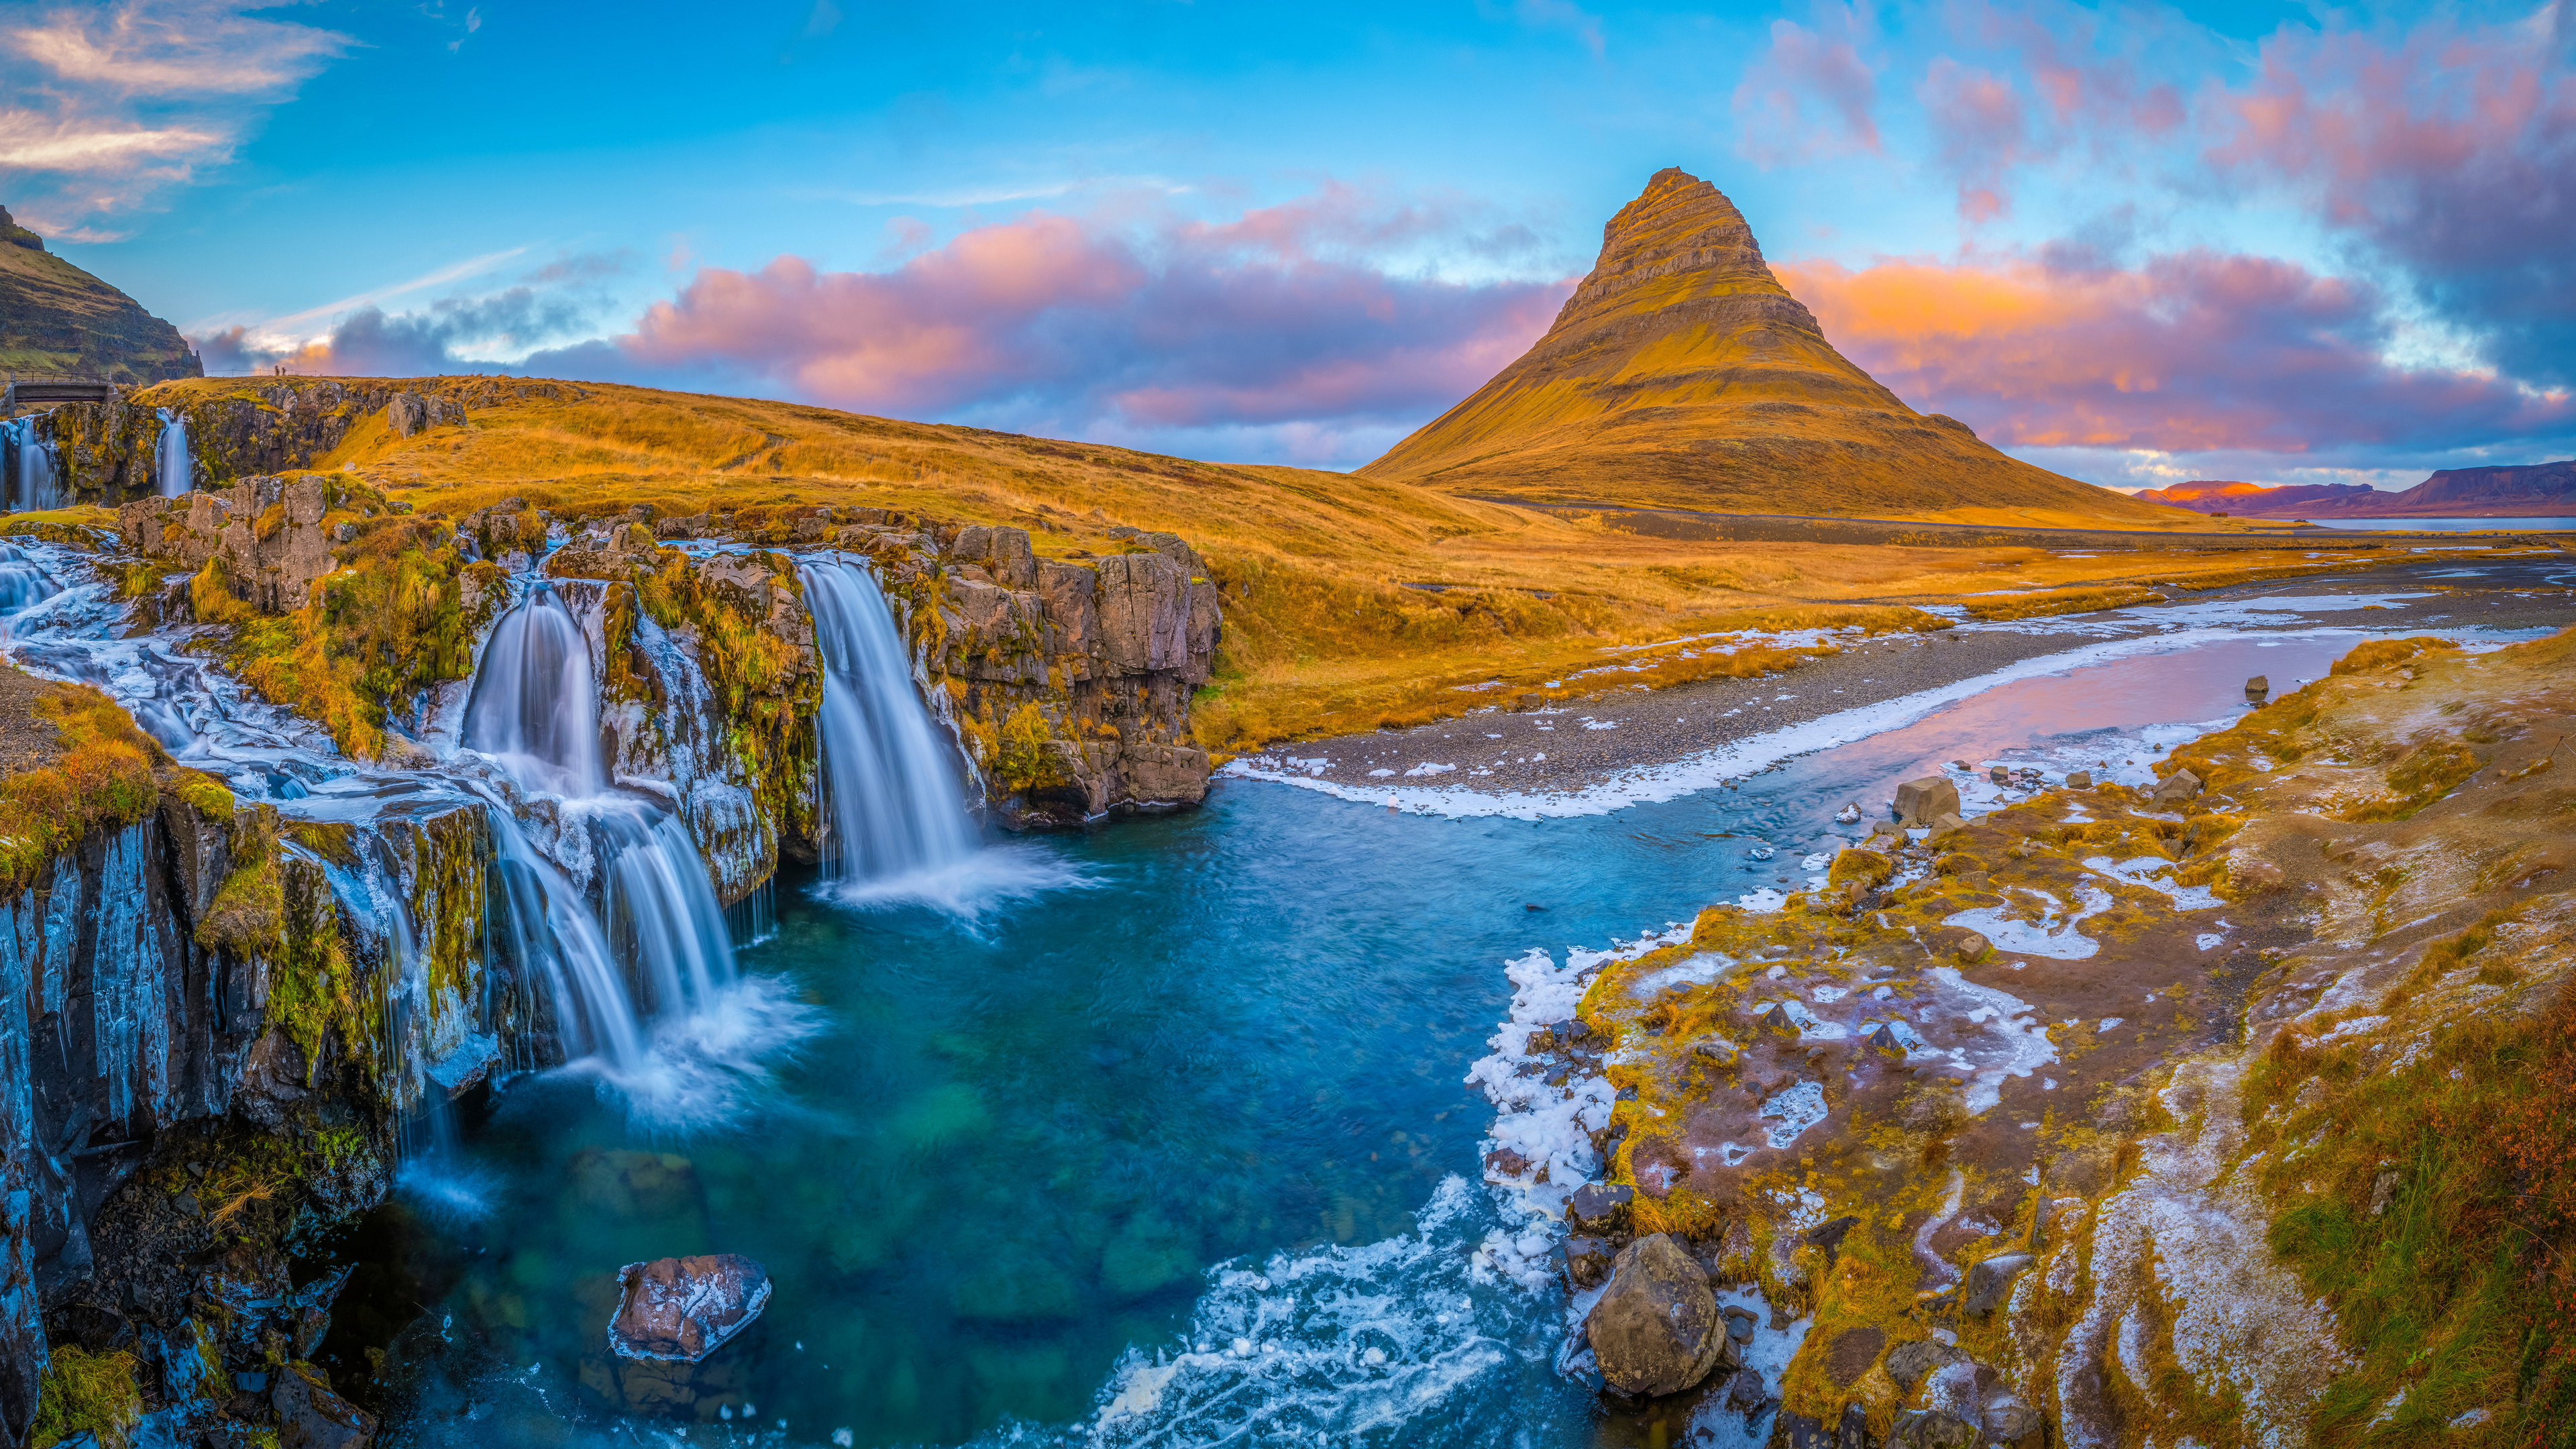 General 3840x2160 Iceland nature landscape waterfall river water sunset sky clouds stones Kirkjufell mountains